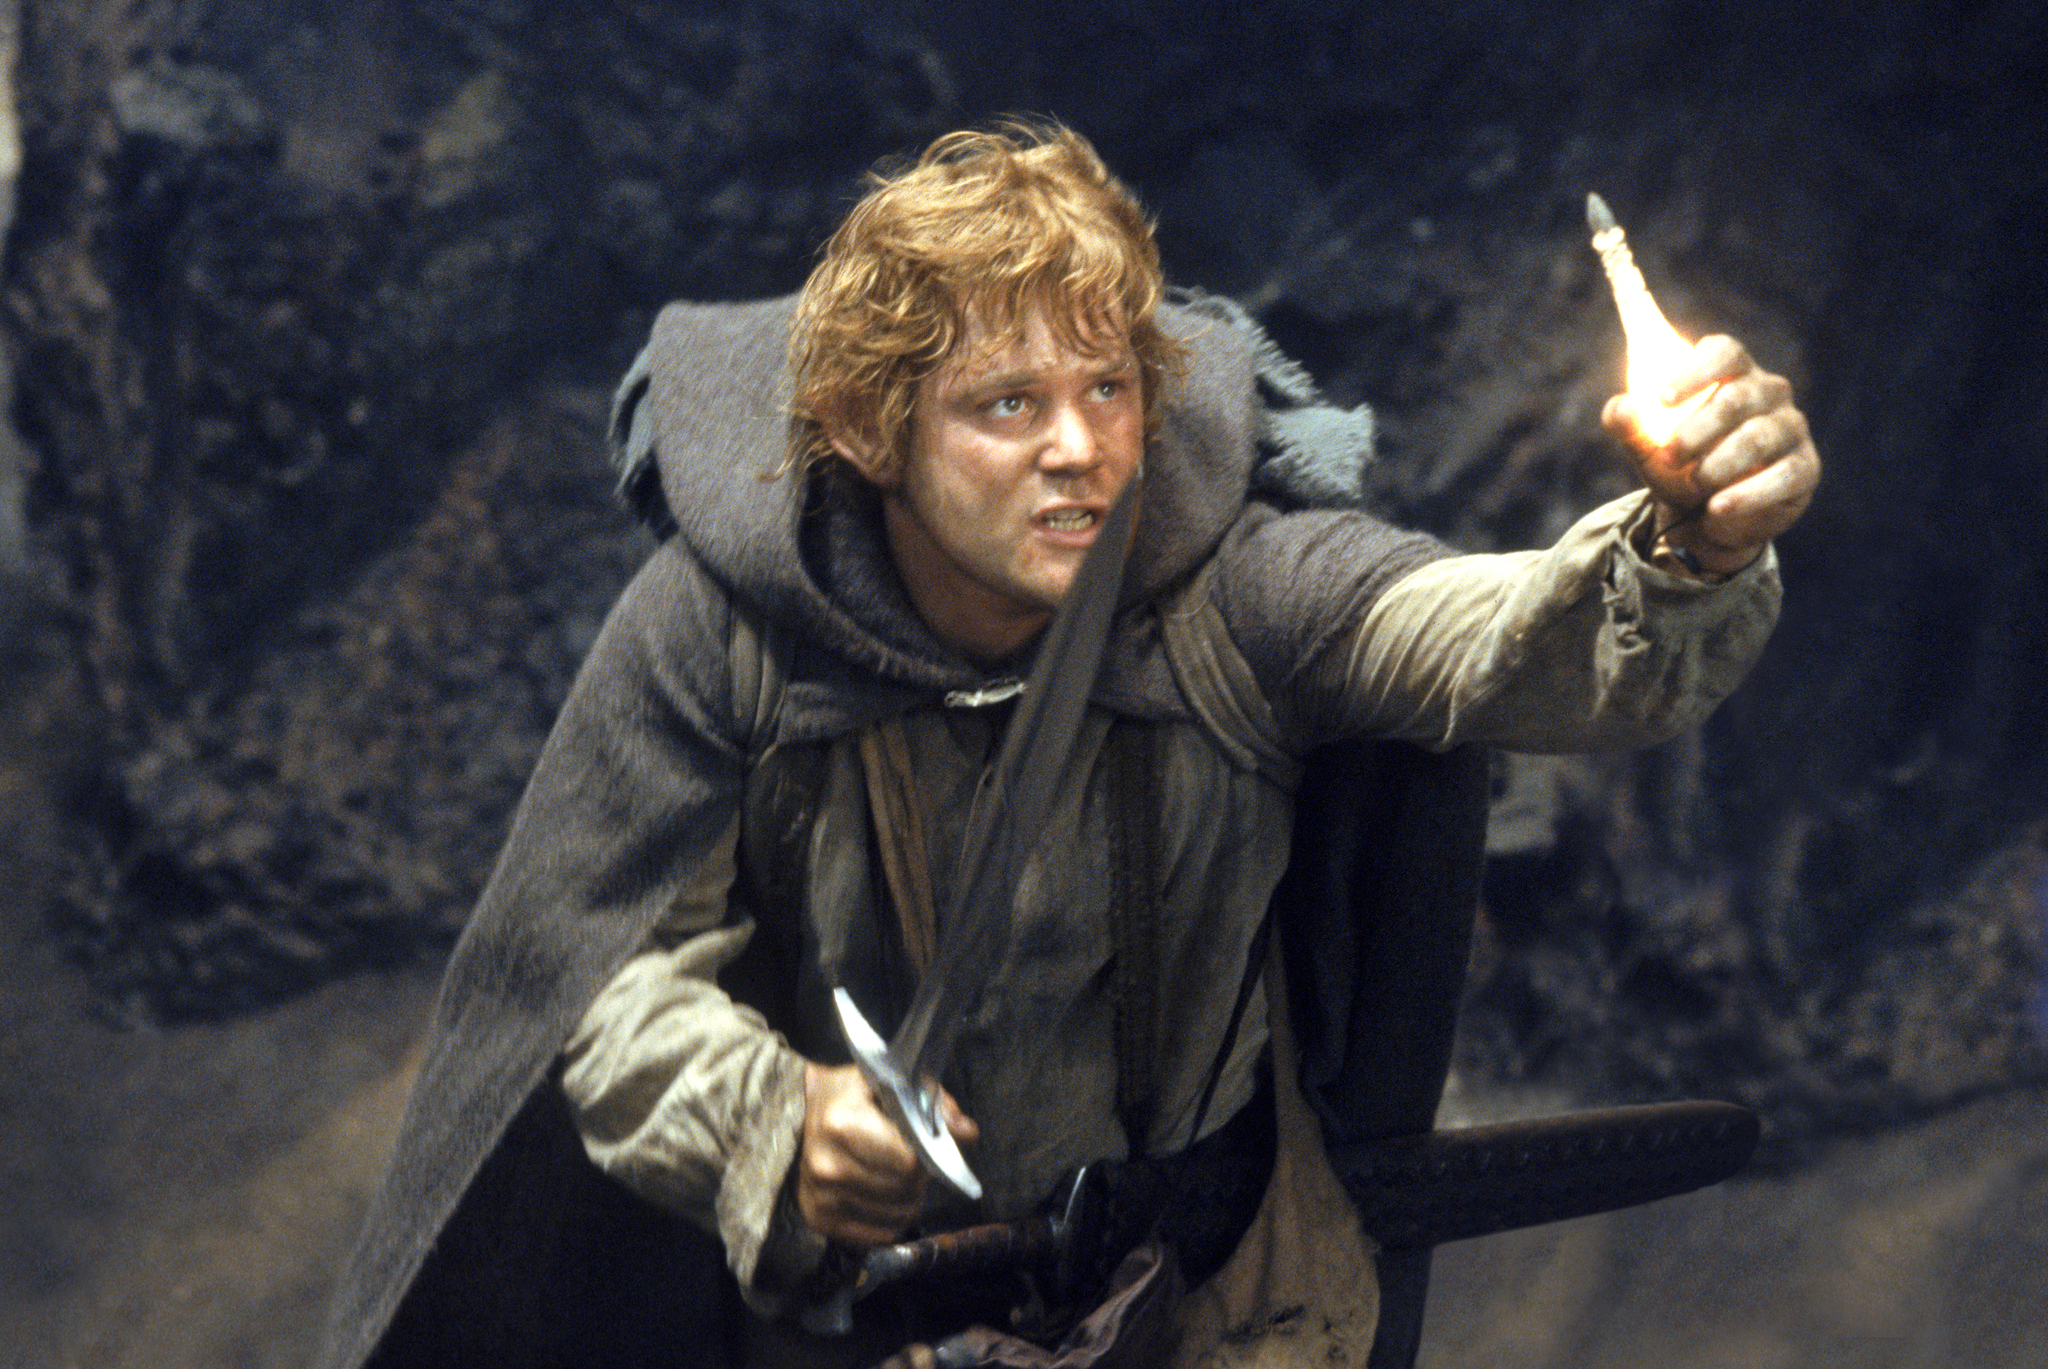 Sean Astin in The Lord of the Rings: The Return of the King (2003)